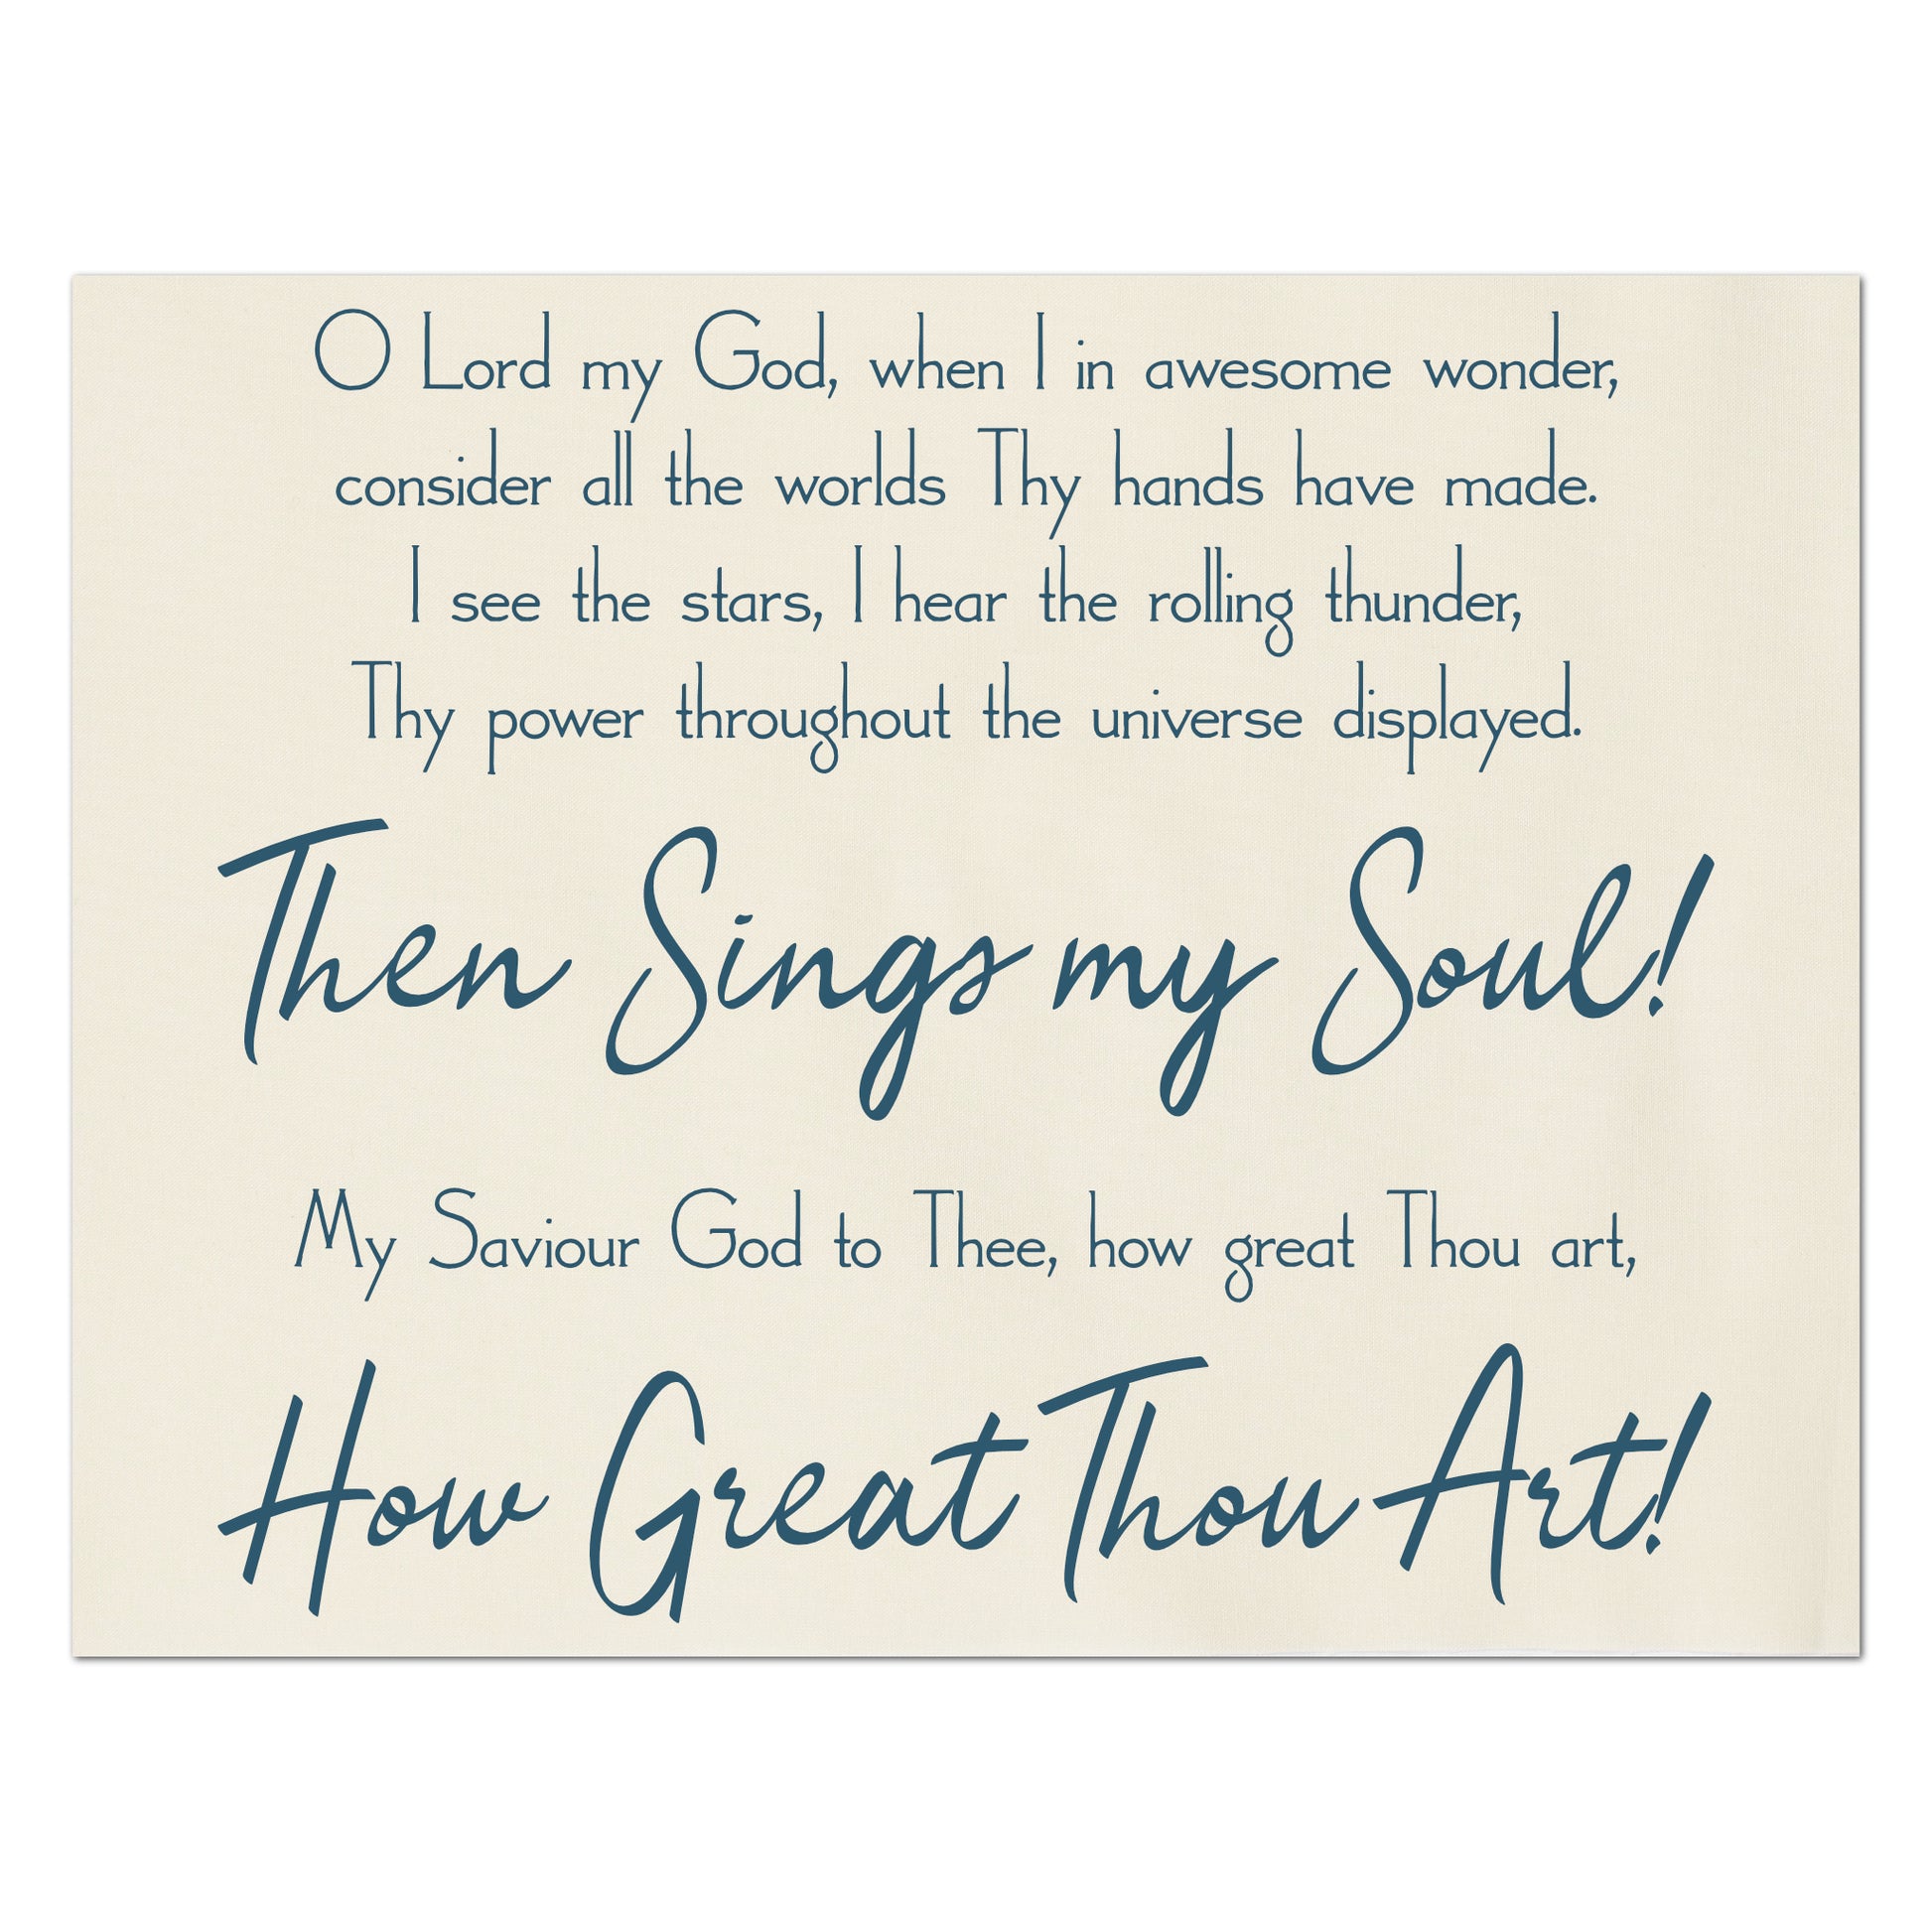 O Lord my God, when I in awesome wonder, consider all the worlds Thy hands have made.  I see the stars, I hear the rolling thunder, Thy power throughout the universe displayed.  Then sings my soul!  My Saviour God to Thee, how great Thou art, How Great Thou Art!  - Religious Fabric Panel Print, Quilt Block, Sewing, Crafts